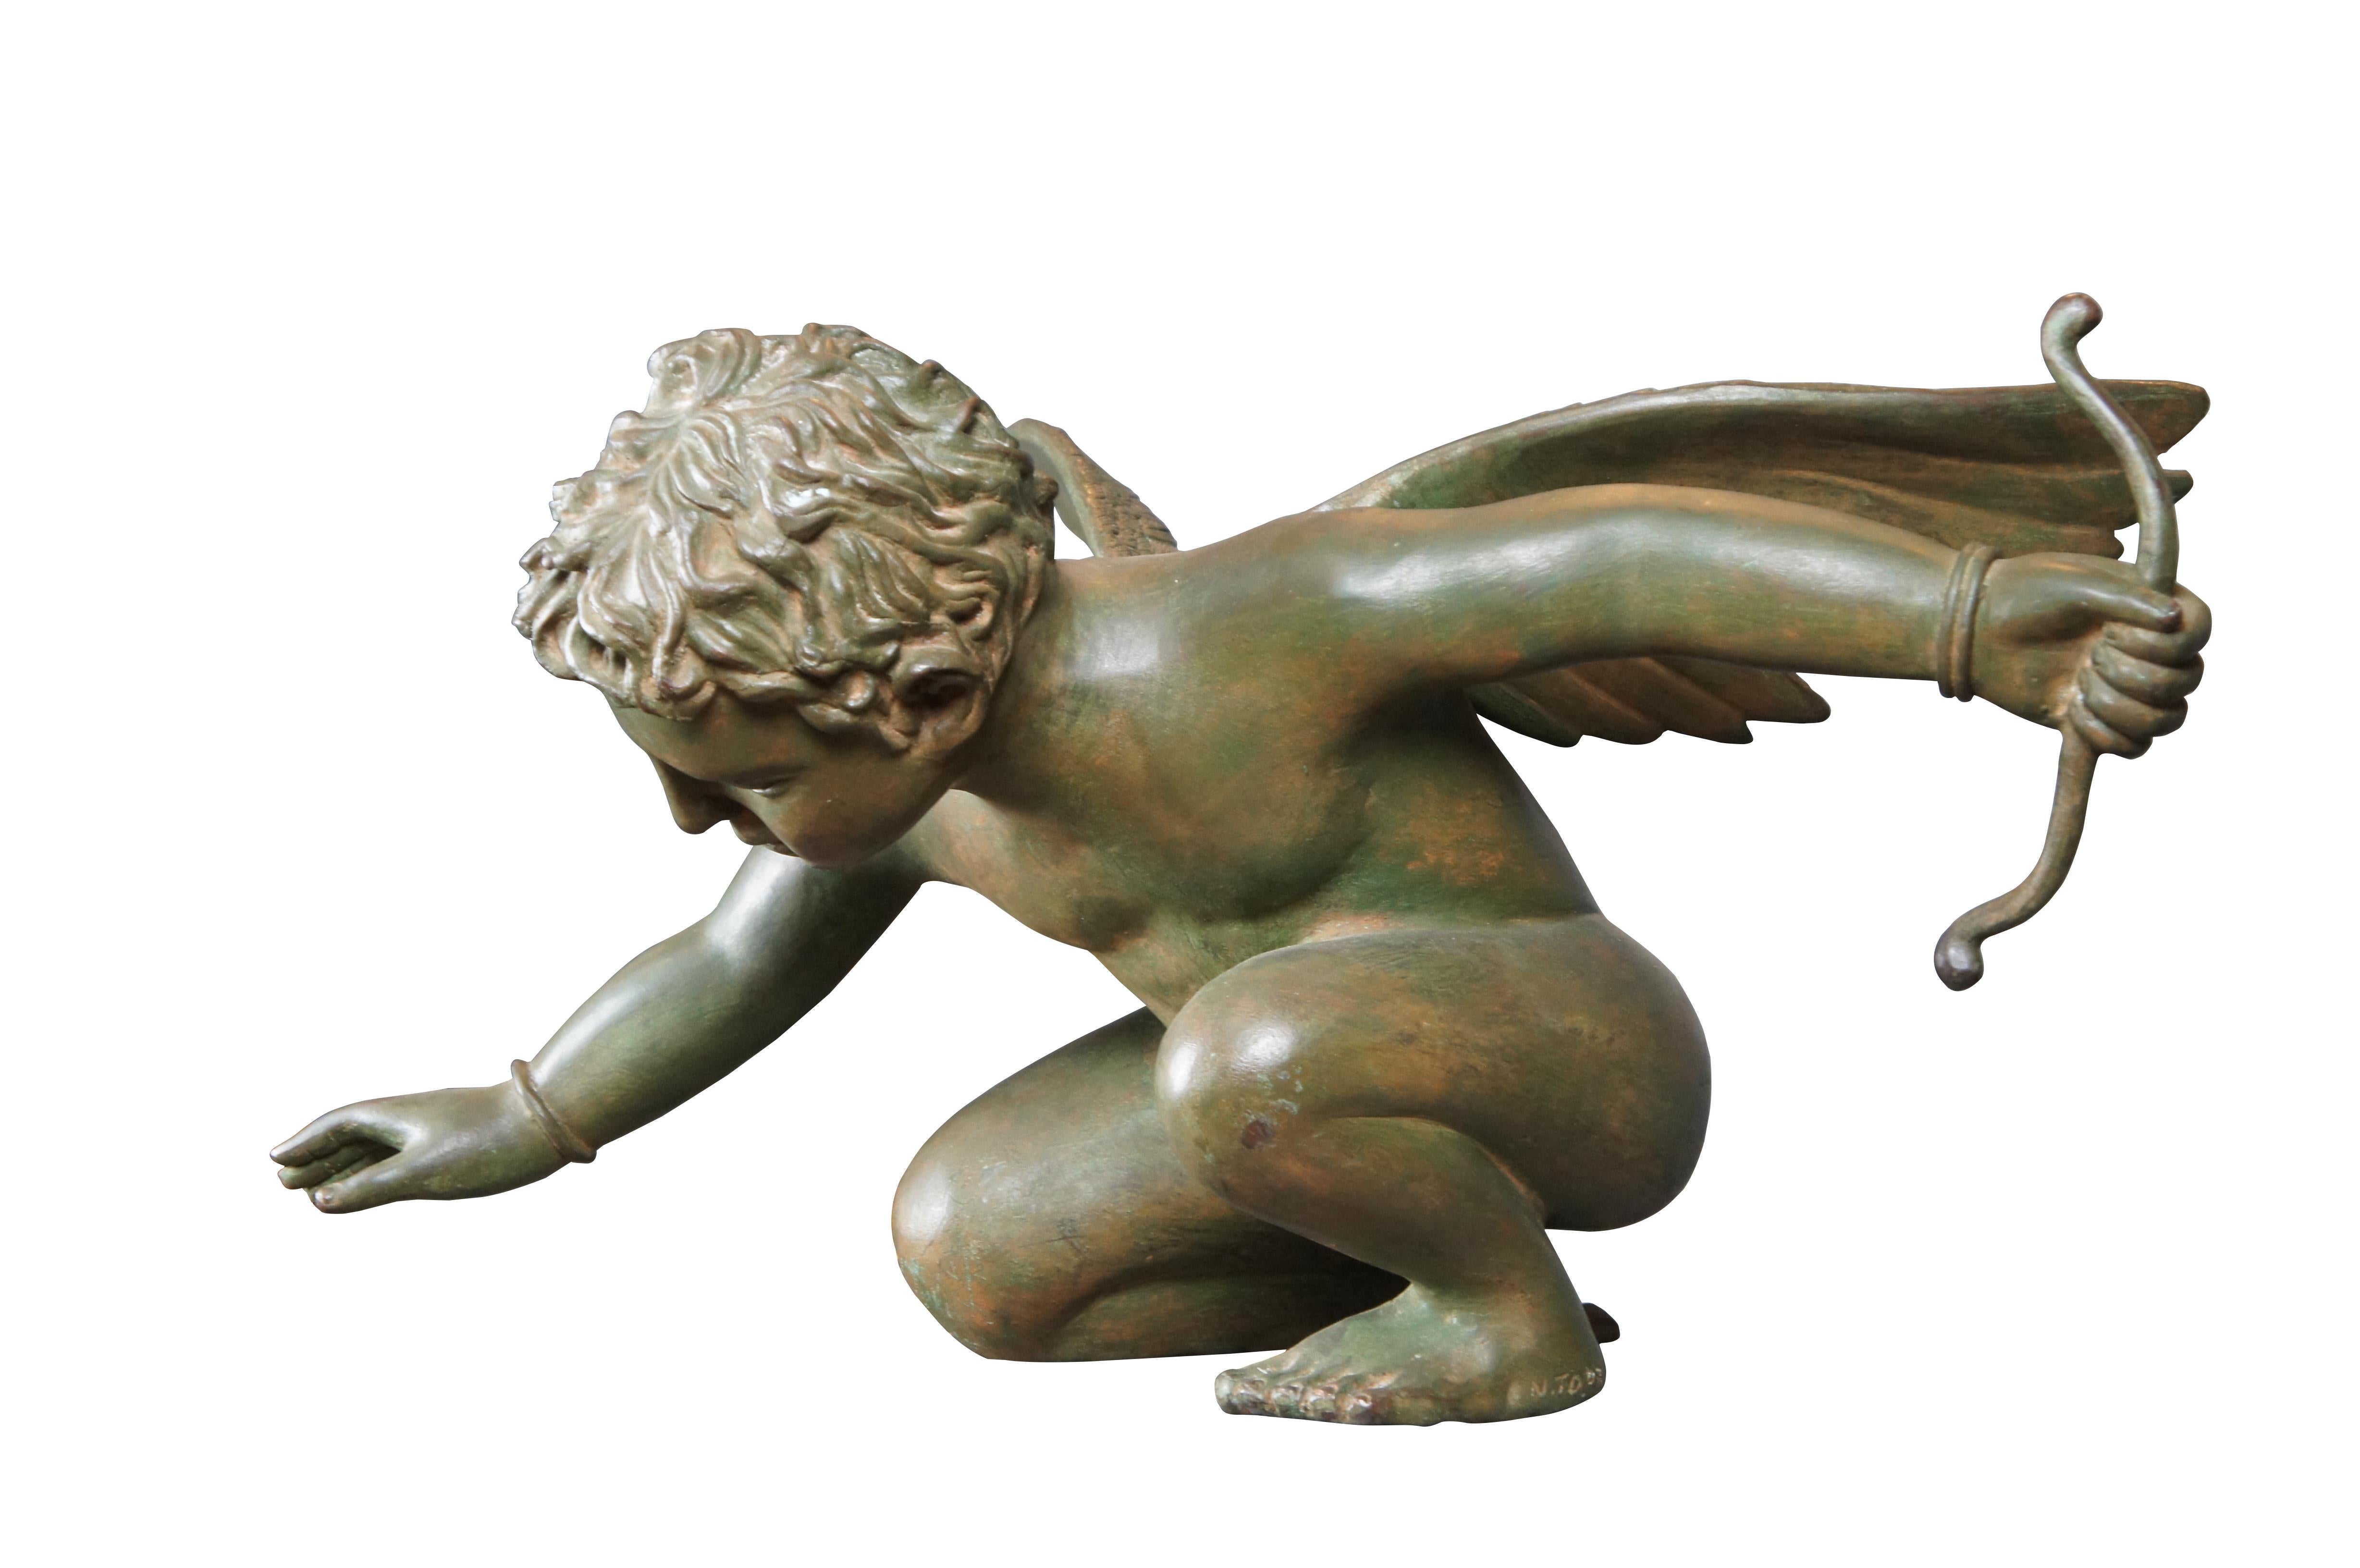 An exceptional bronze by listed artist Nishan Toor

Features a winged cherub / putti in the kneeling position with an outstretched arm and bow. Signed along the side of the left foot. The bronze has a beautiful verdigris patina.

Nishan Toor (1888 -